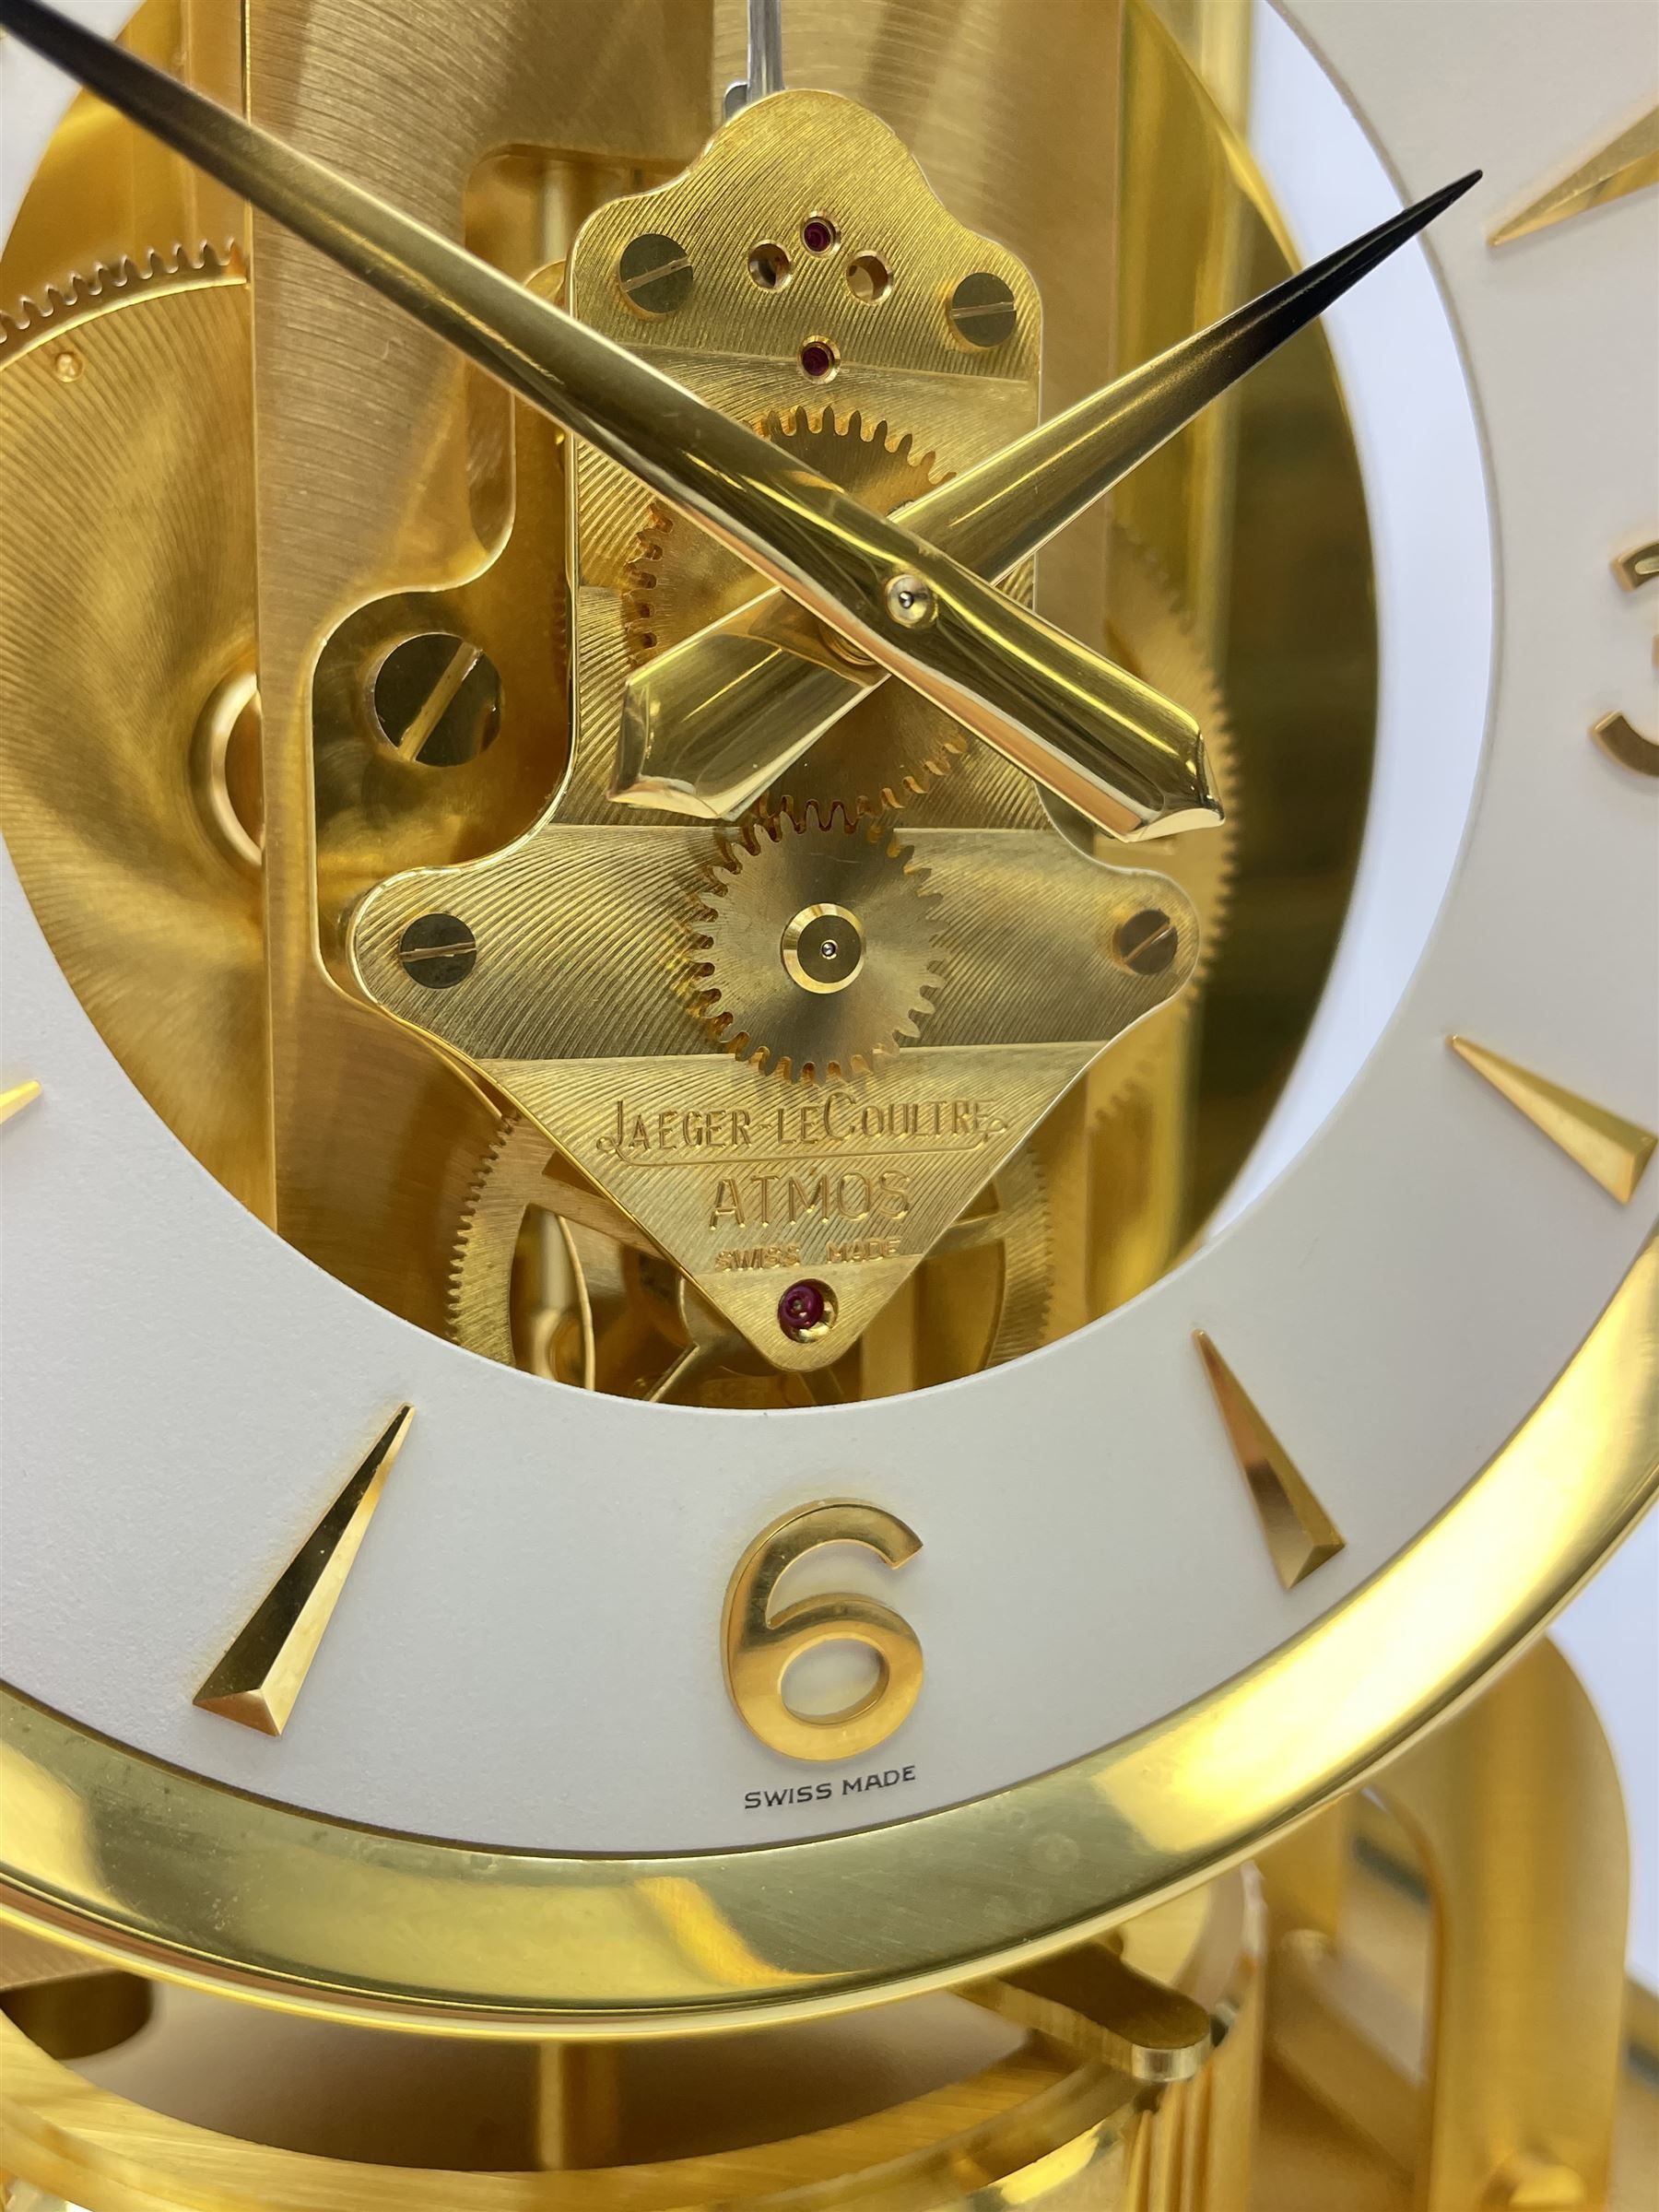 Jaeger-LeCoultre Atmos timepiece clock - Image 3 of 8